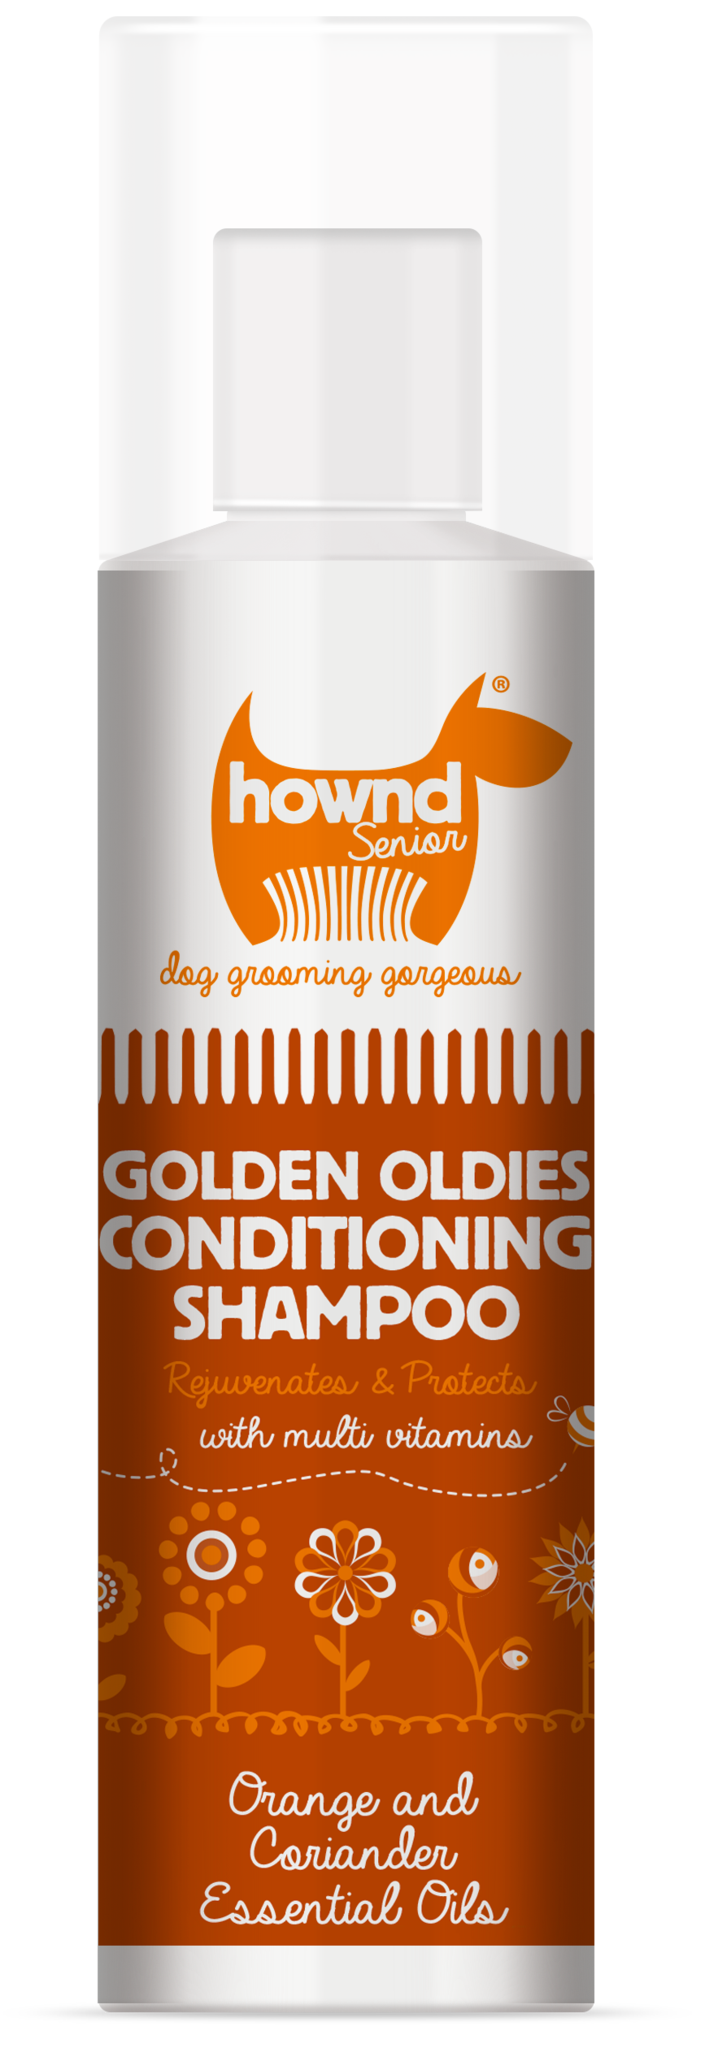 HOWND Conditioning Shampoos